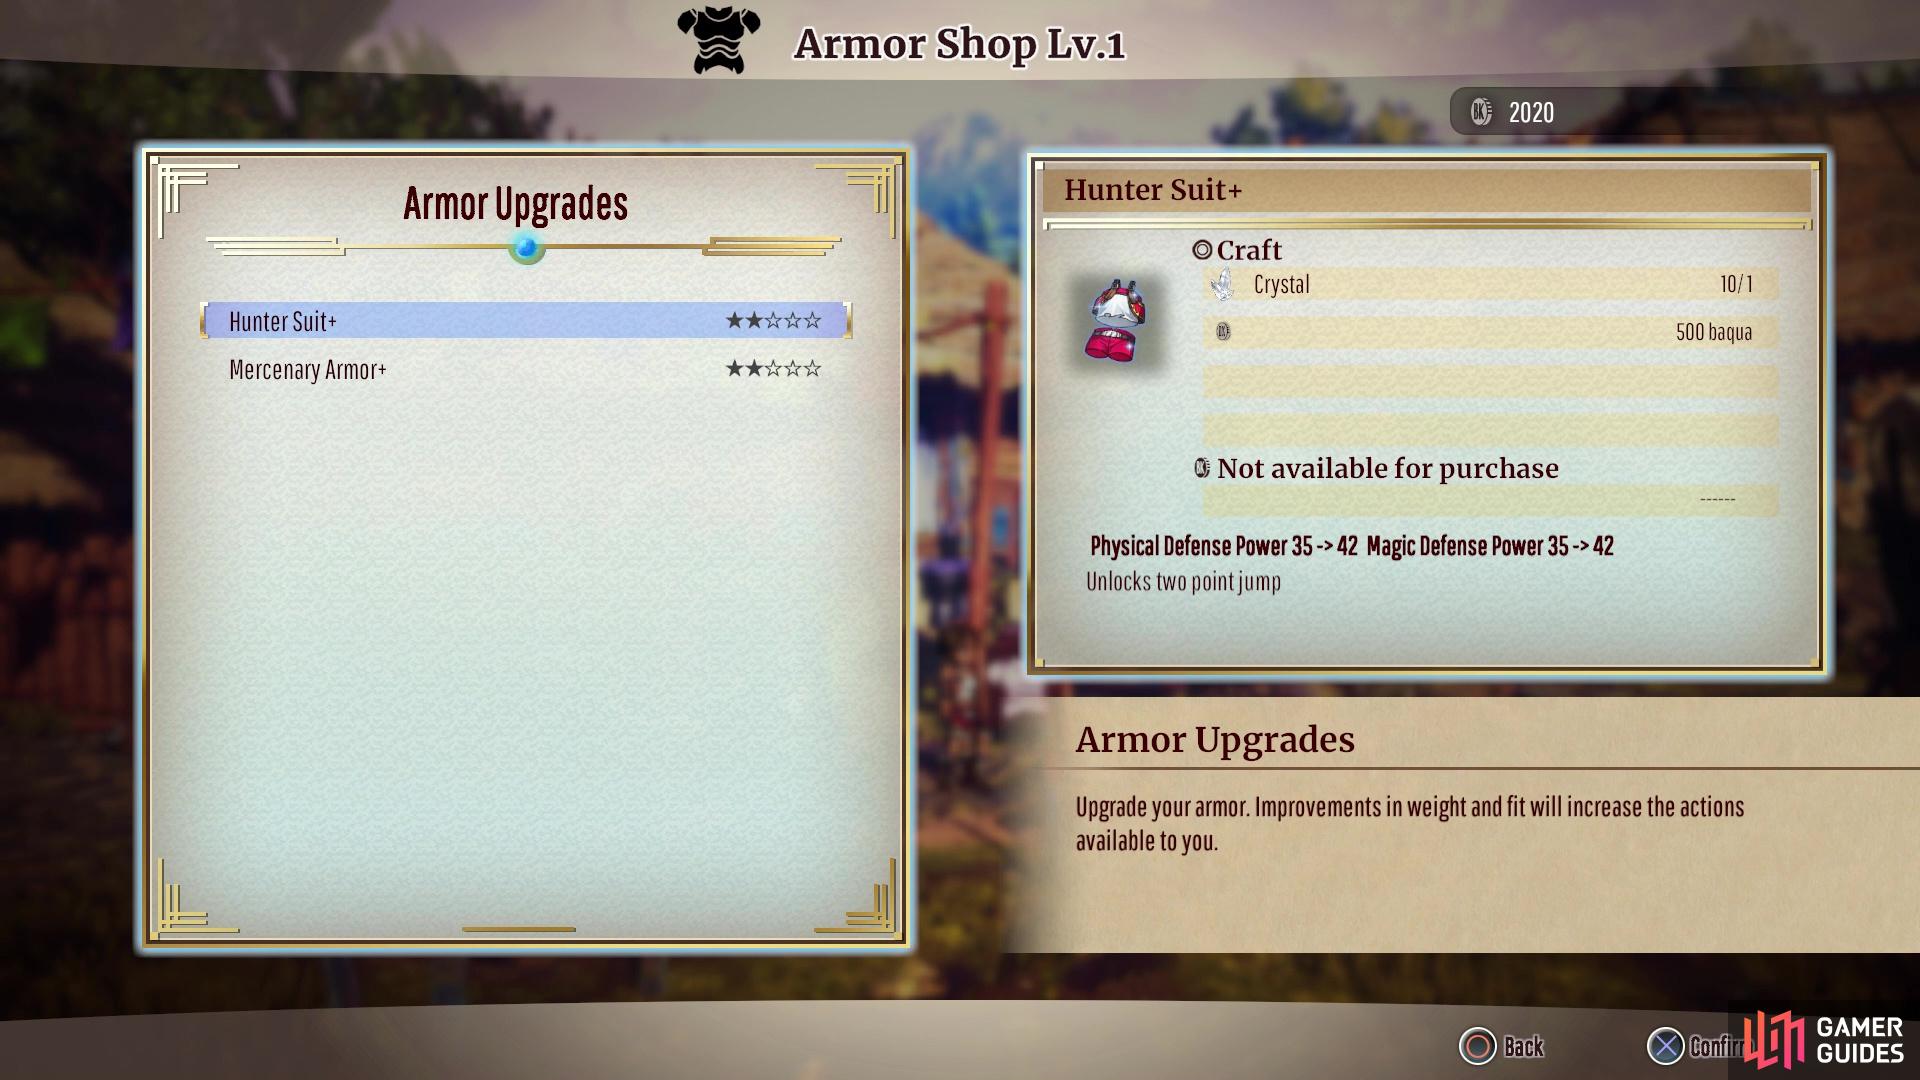 The Armor Shop upgrades will give you a lot of movement abilities